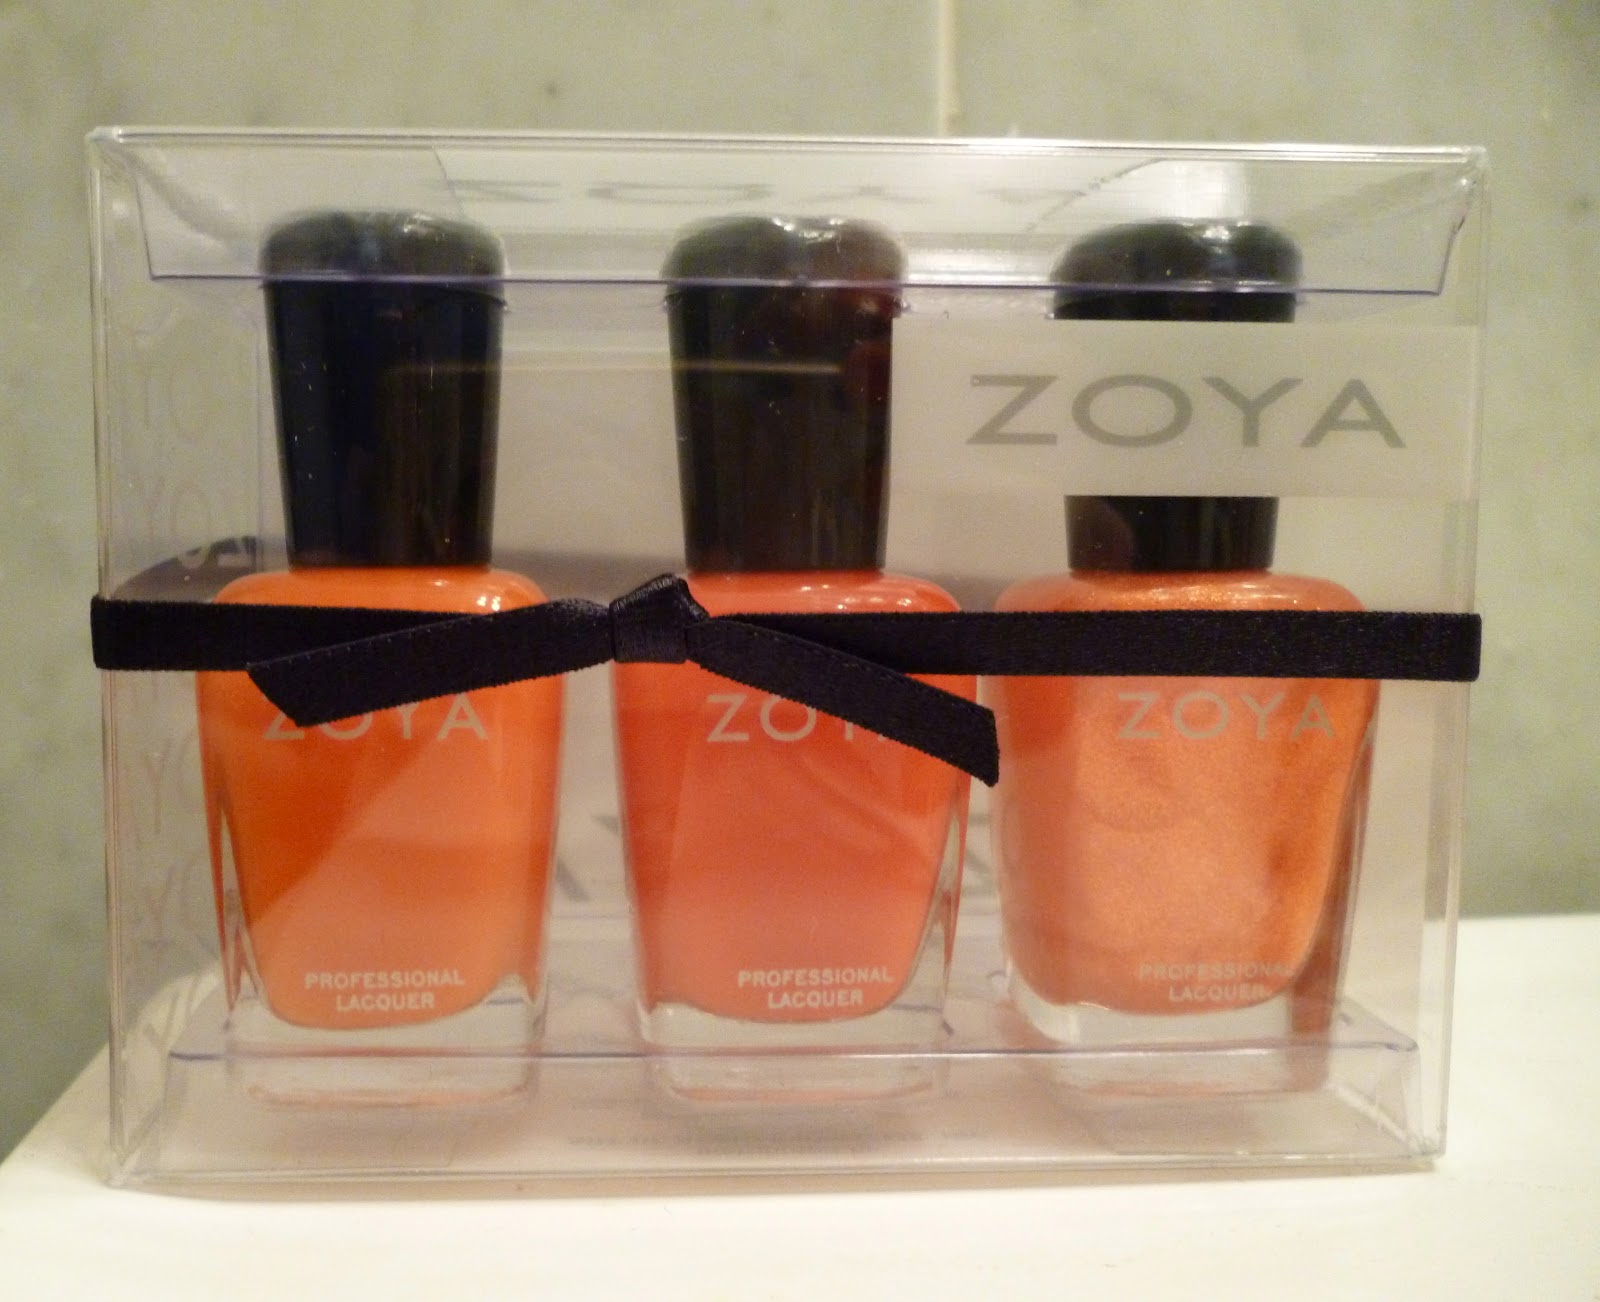 When I found out about Birchbox and Zoya's Exclusive Blogger Collection,